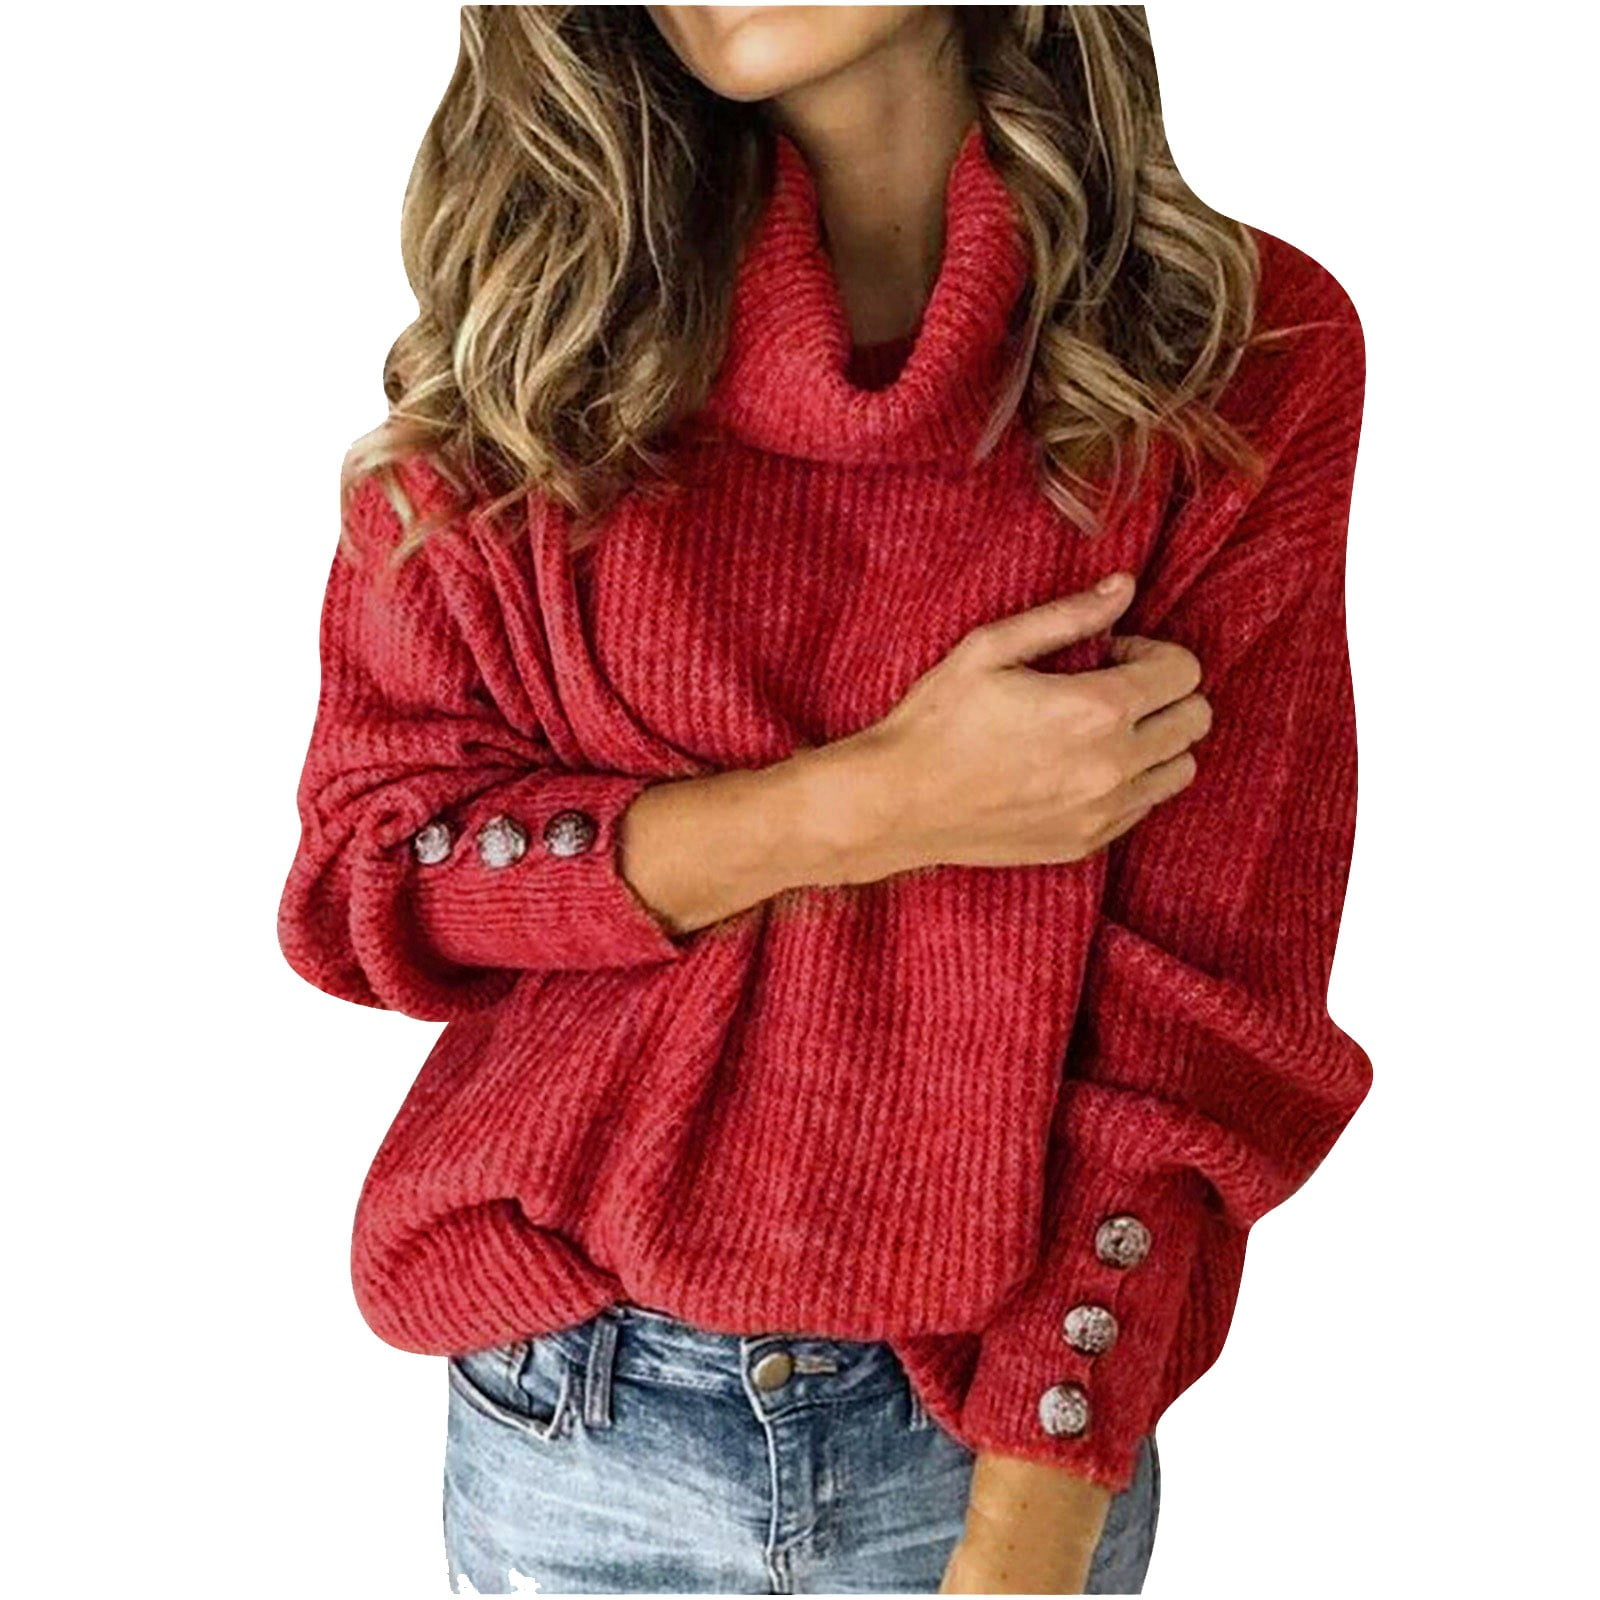 Turtleneck Sweater Women Solid Color Cowl Neck Knit Iraq